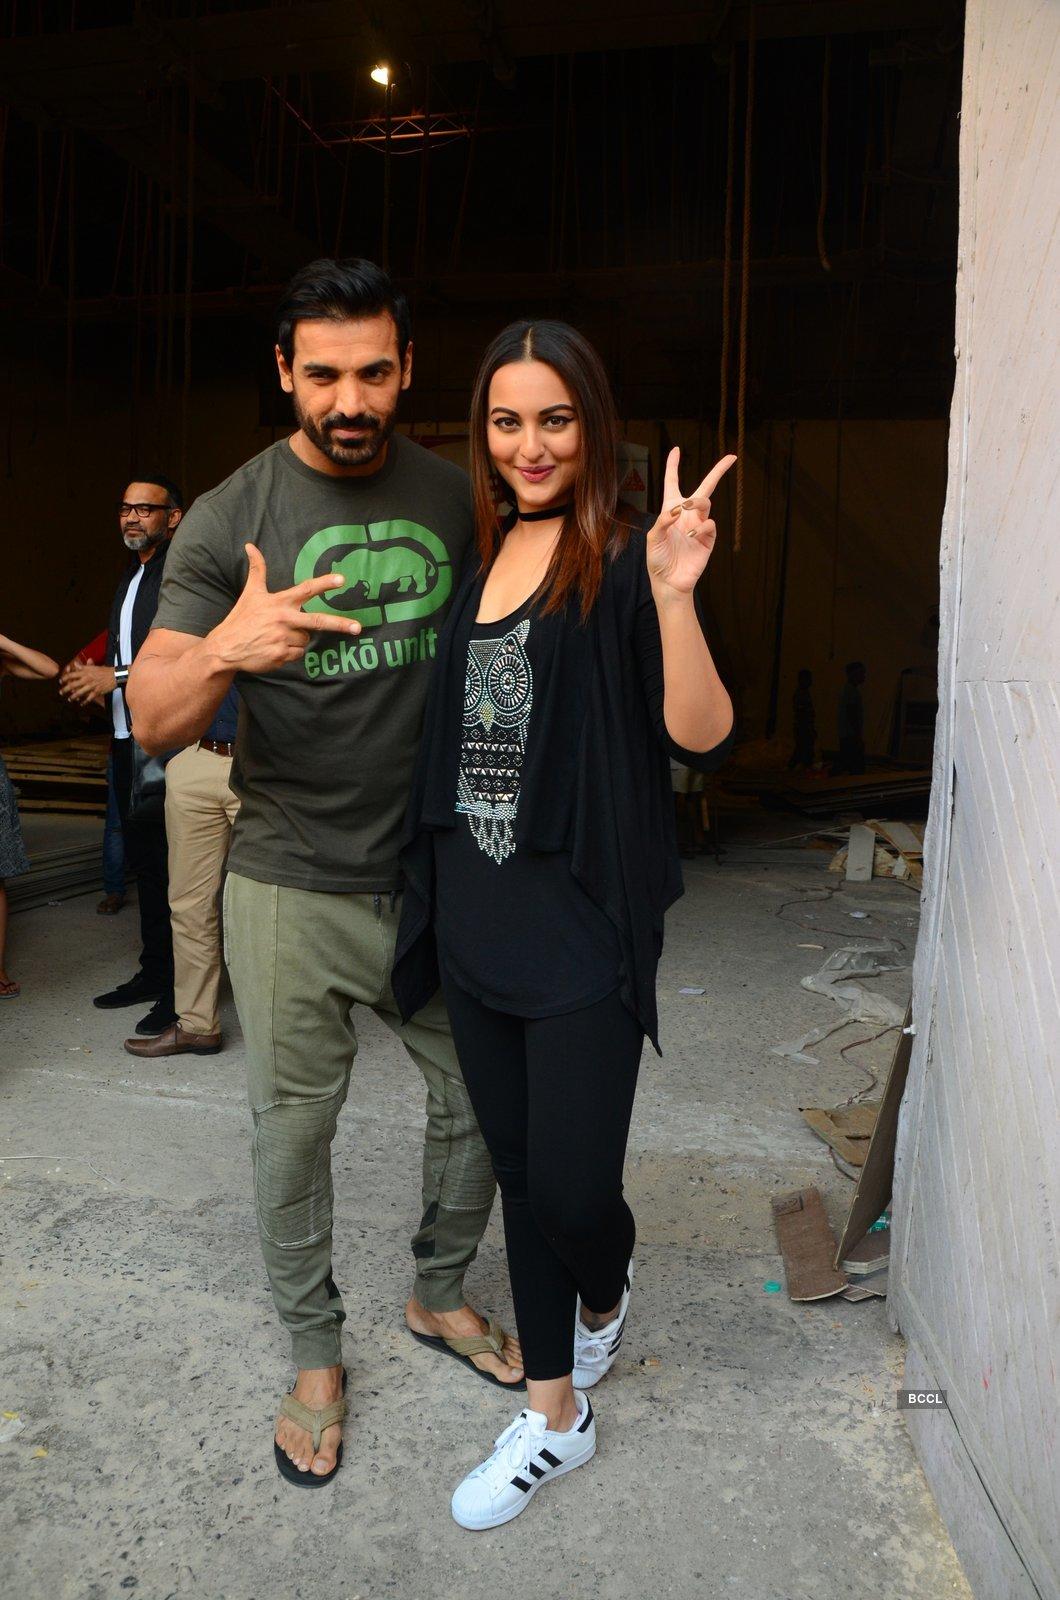 Force 2: Promotion